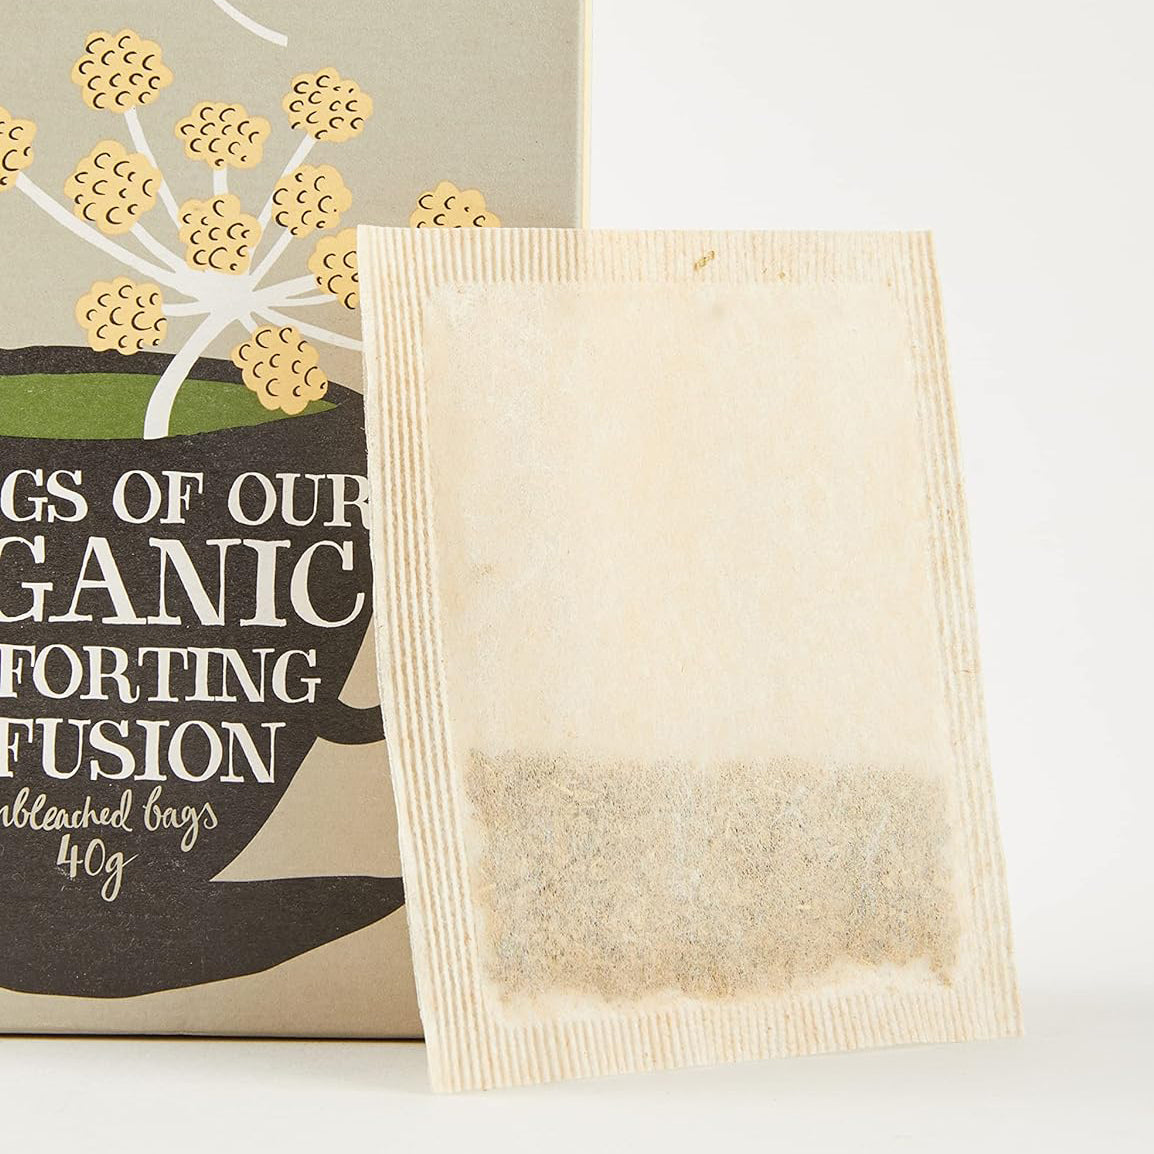 Fennel Infusion 20 bags